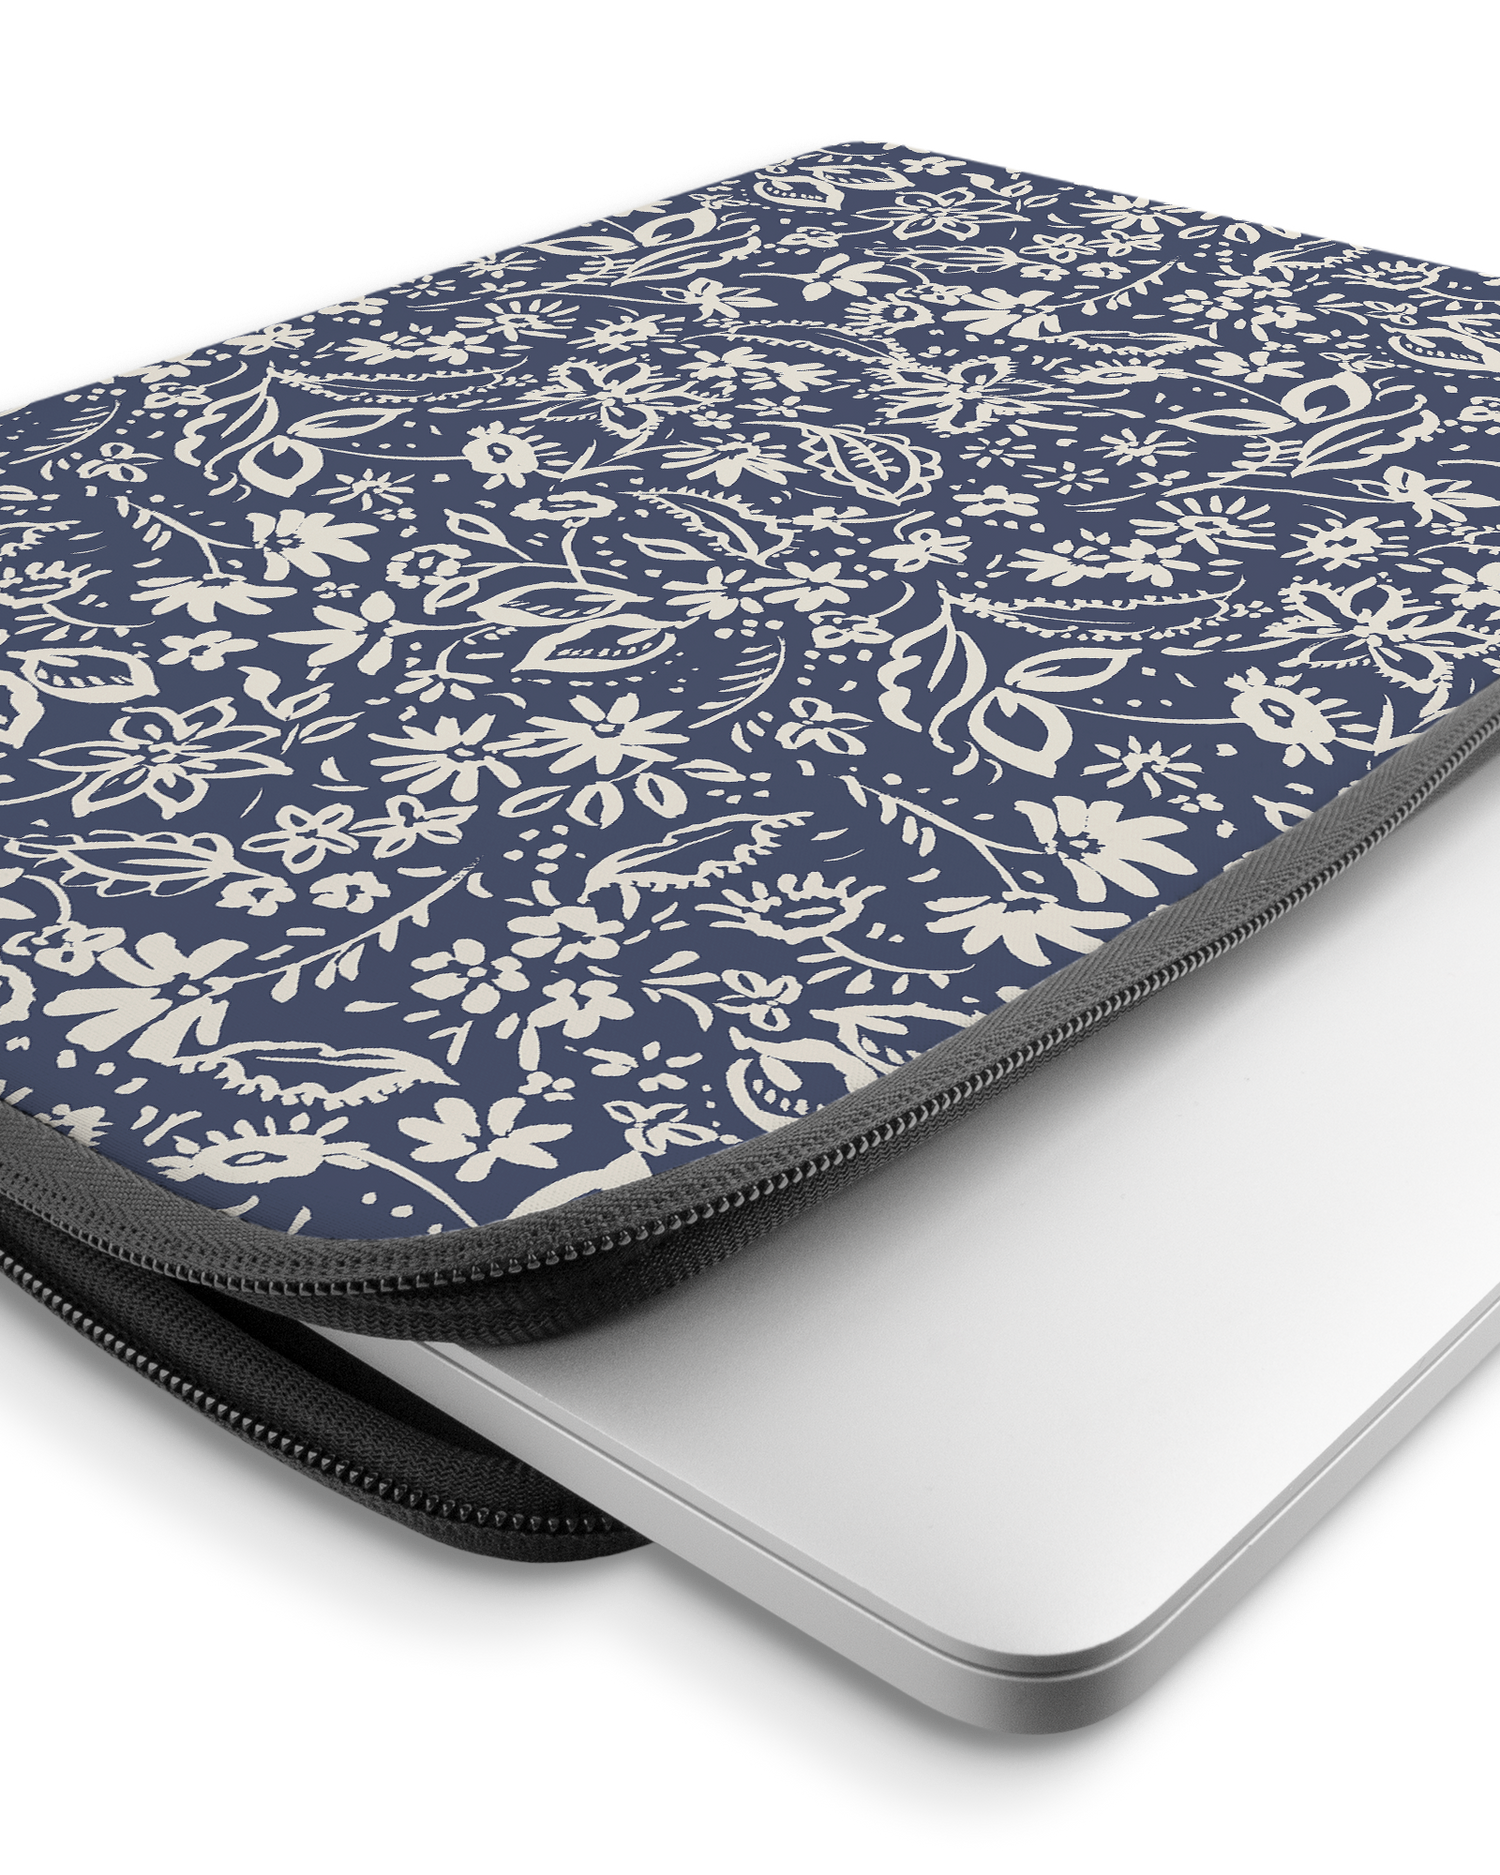 Ditsy Blue Paisley Laptop Case 15-16 inch with device inside